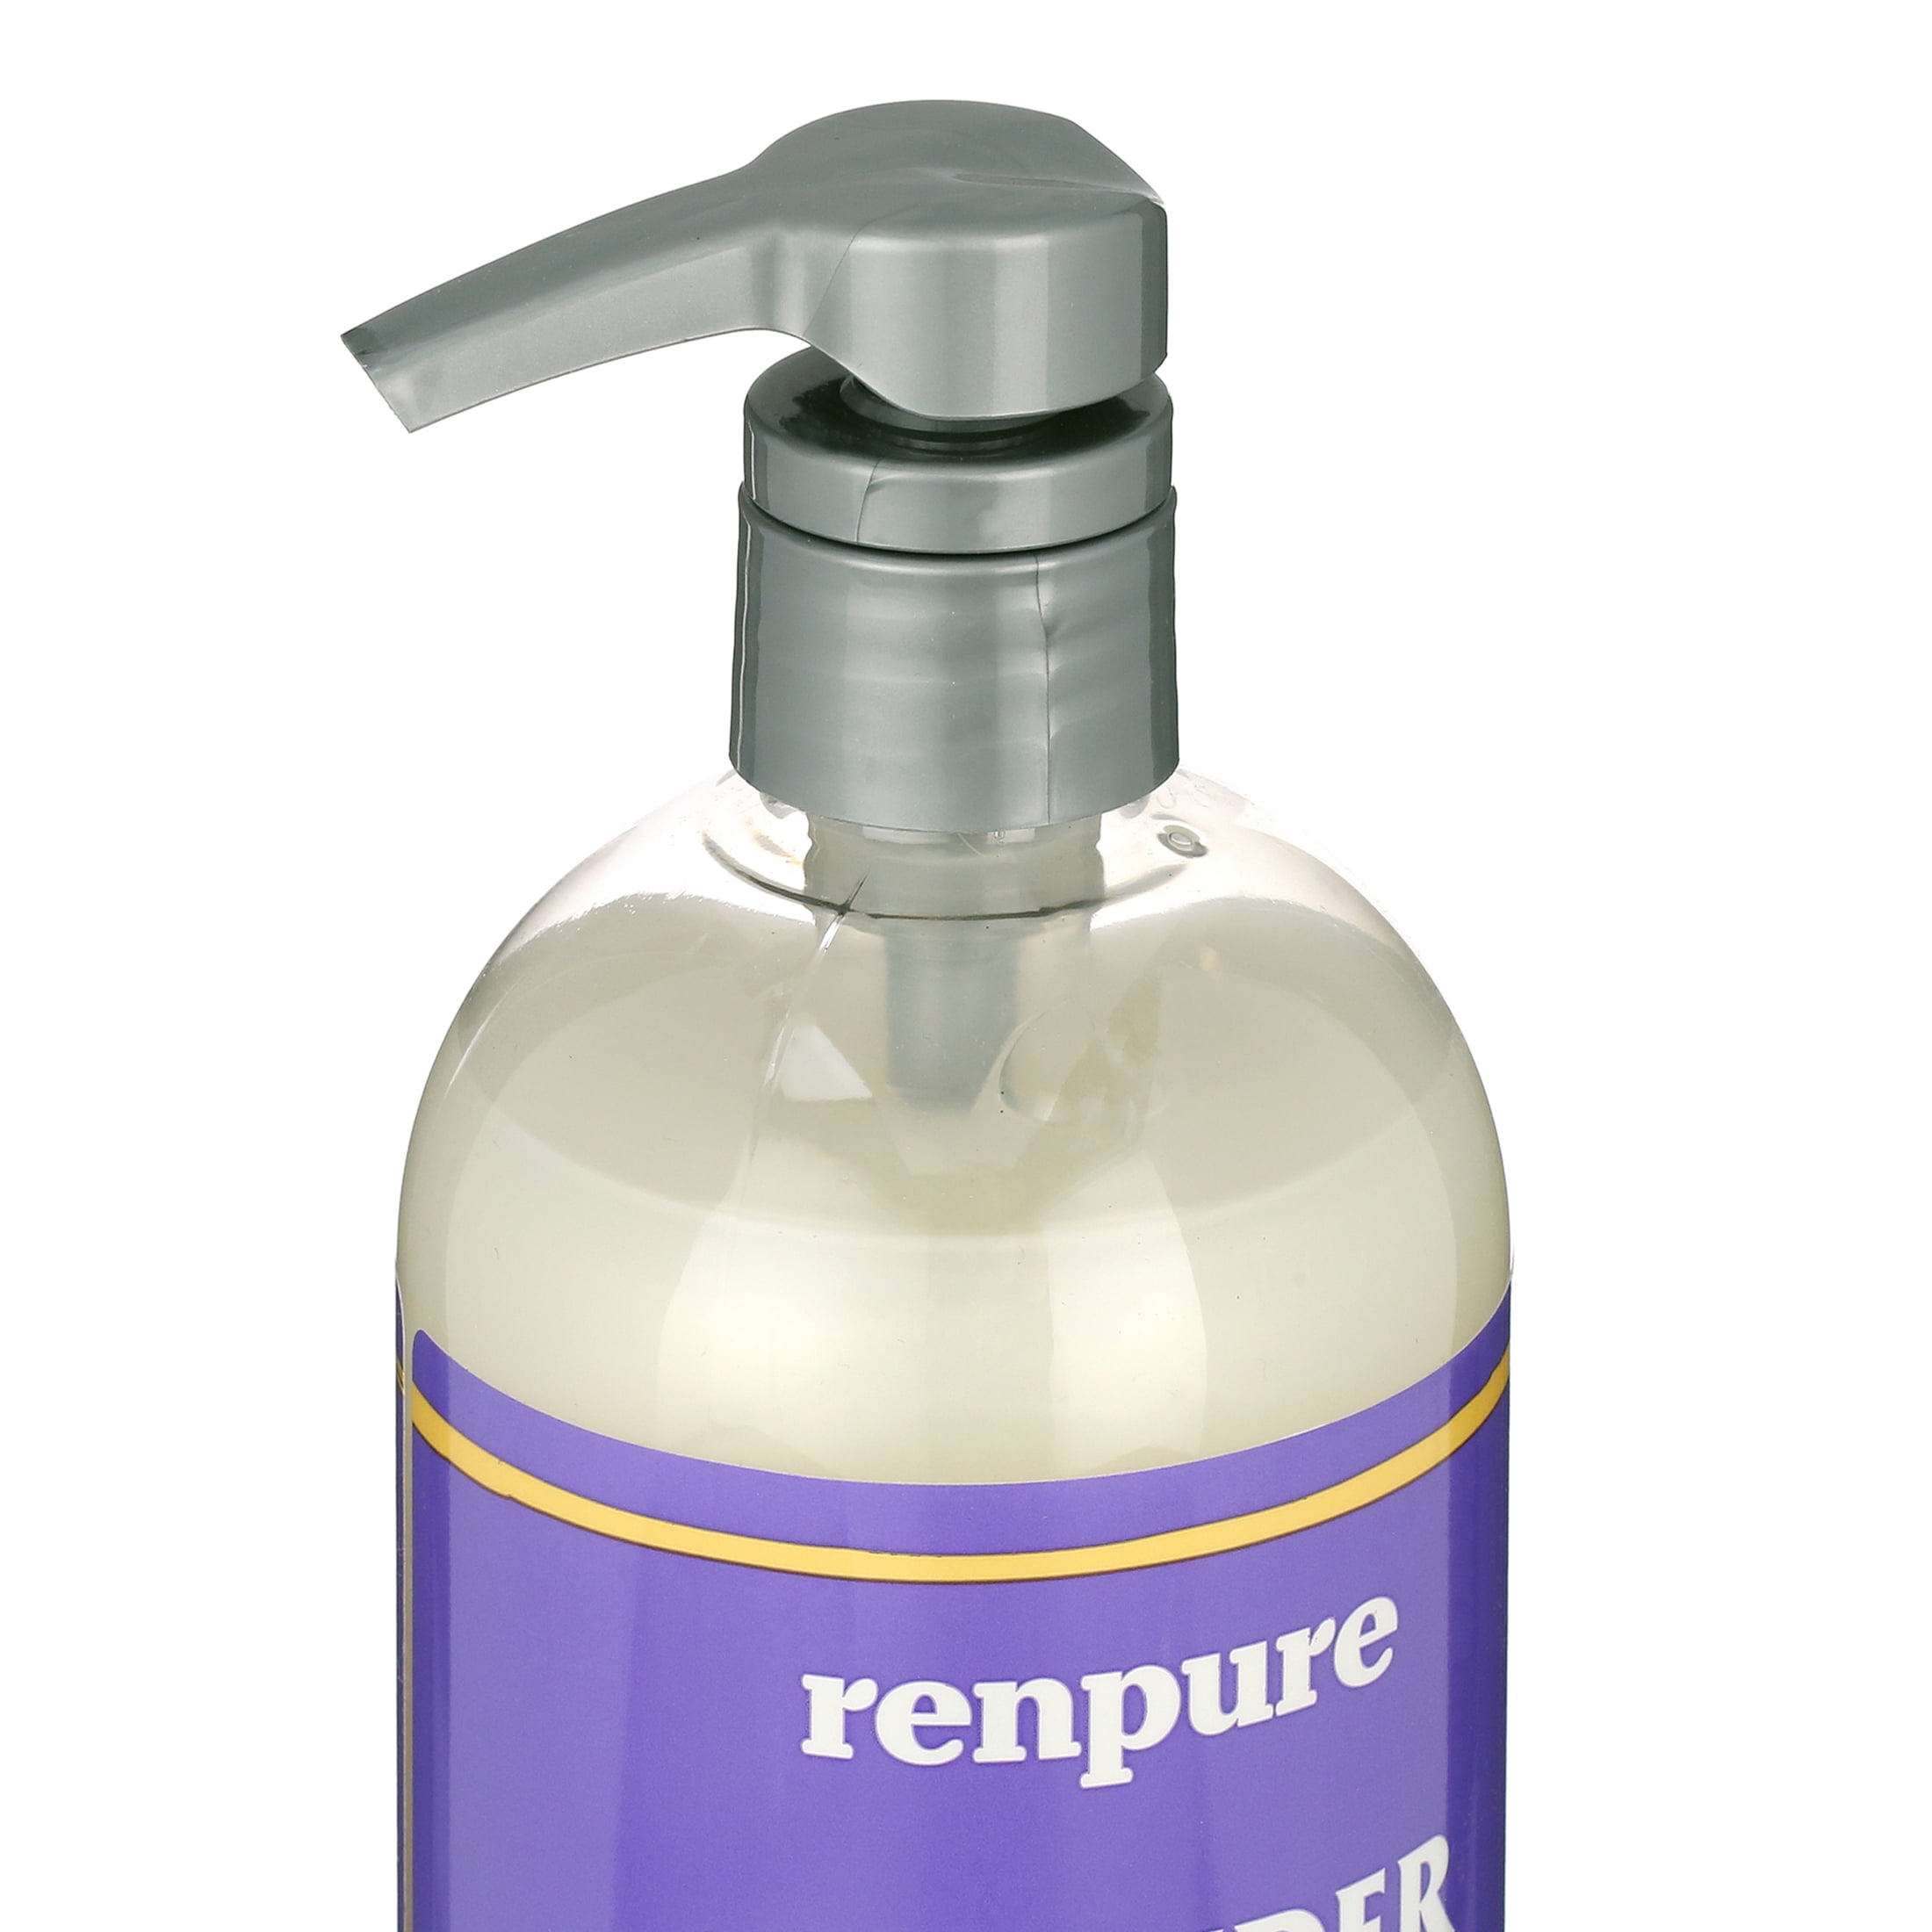 Renpure Lavender & Honey Calming Body Wash for All Skin Types, 24